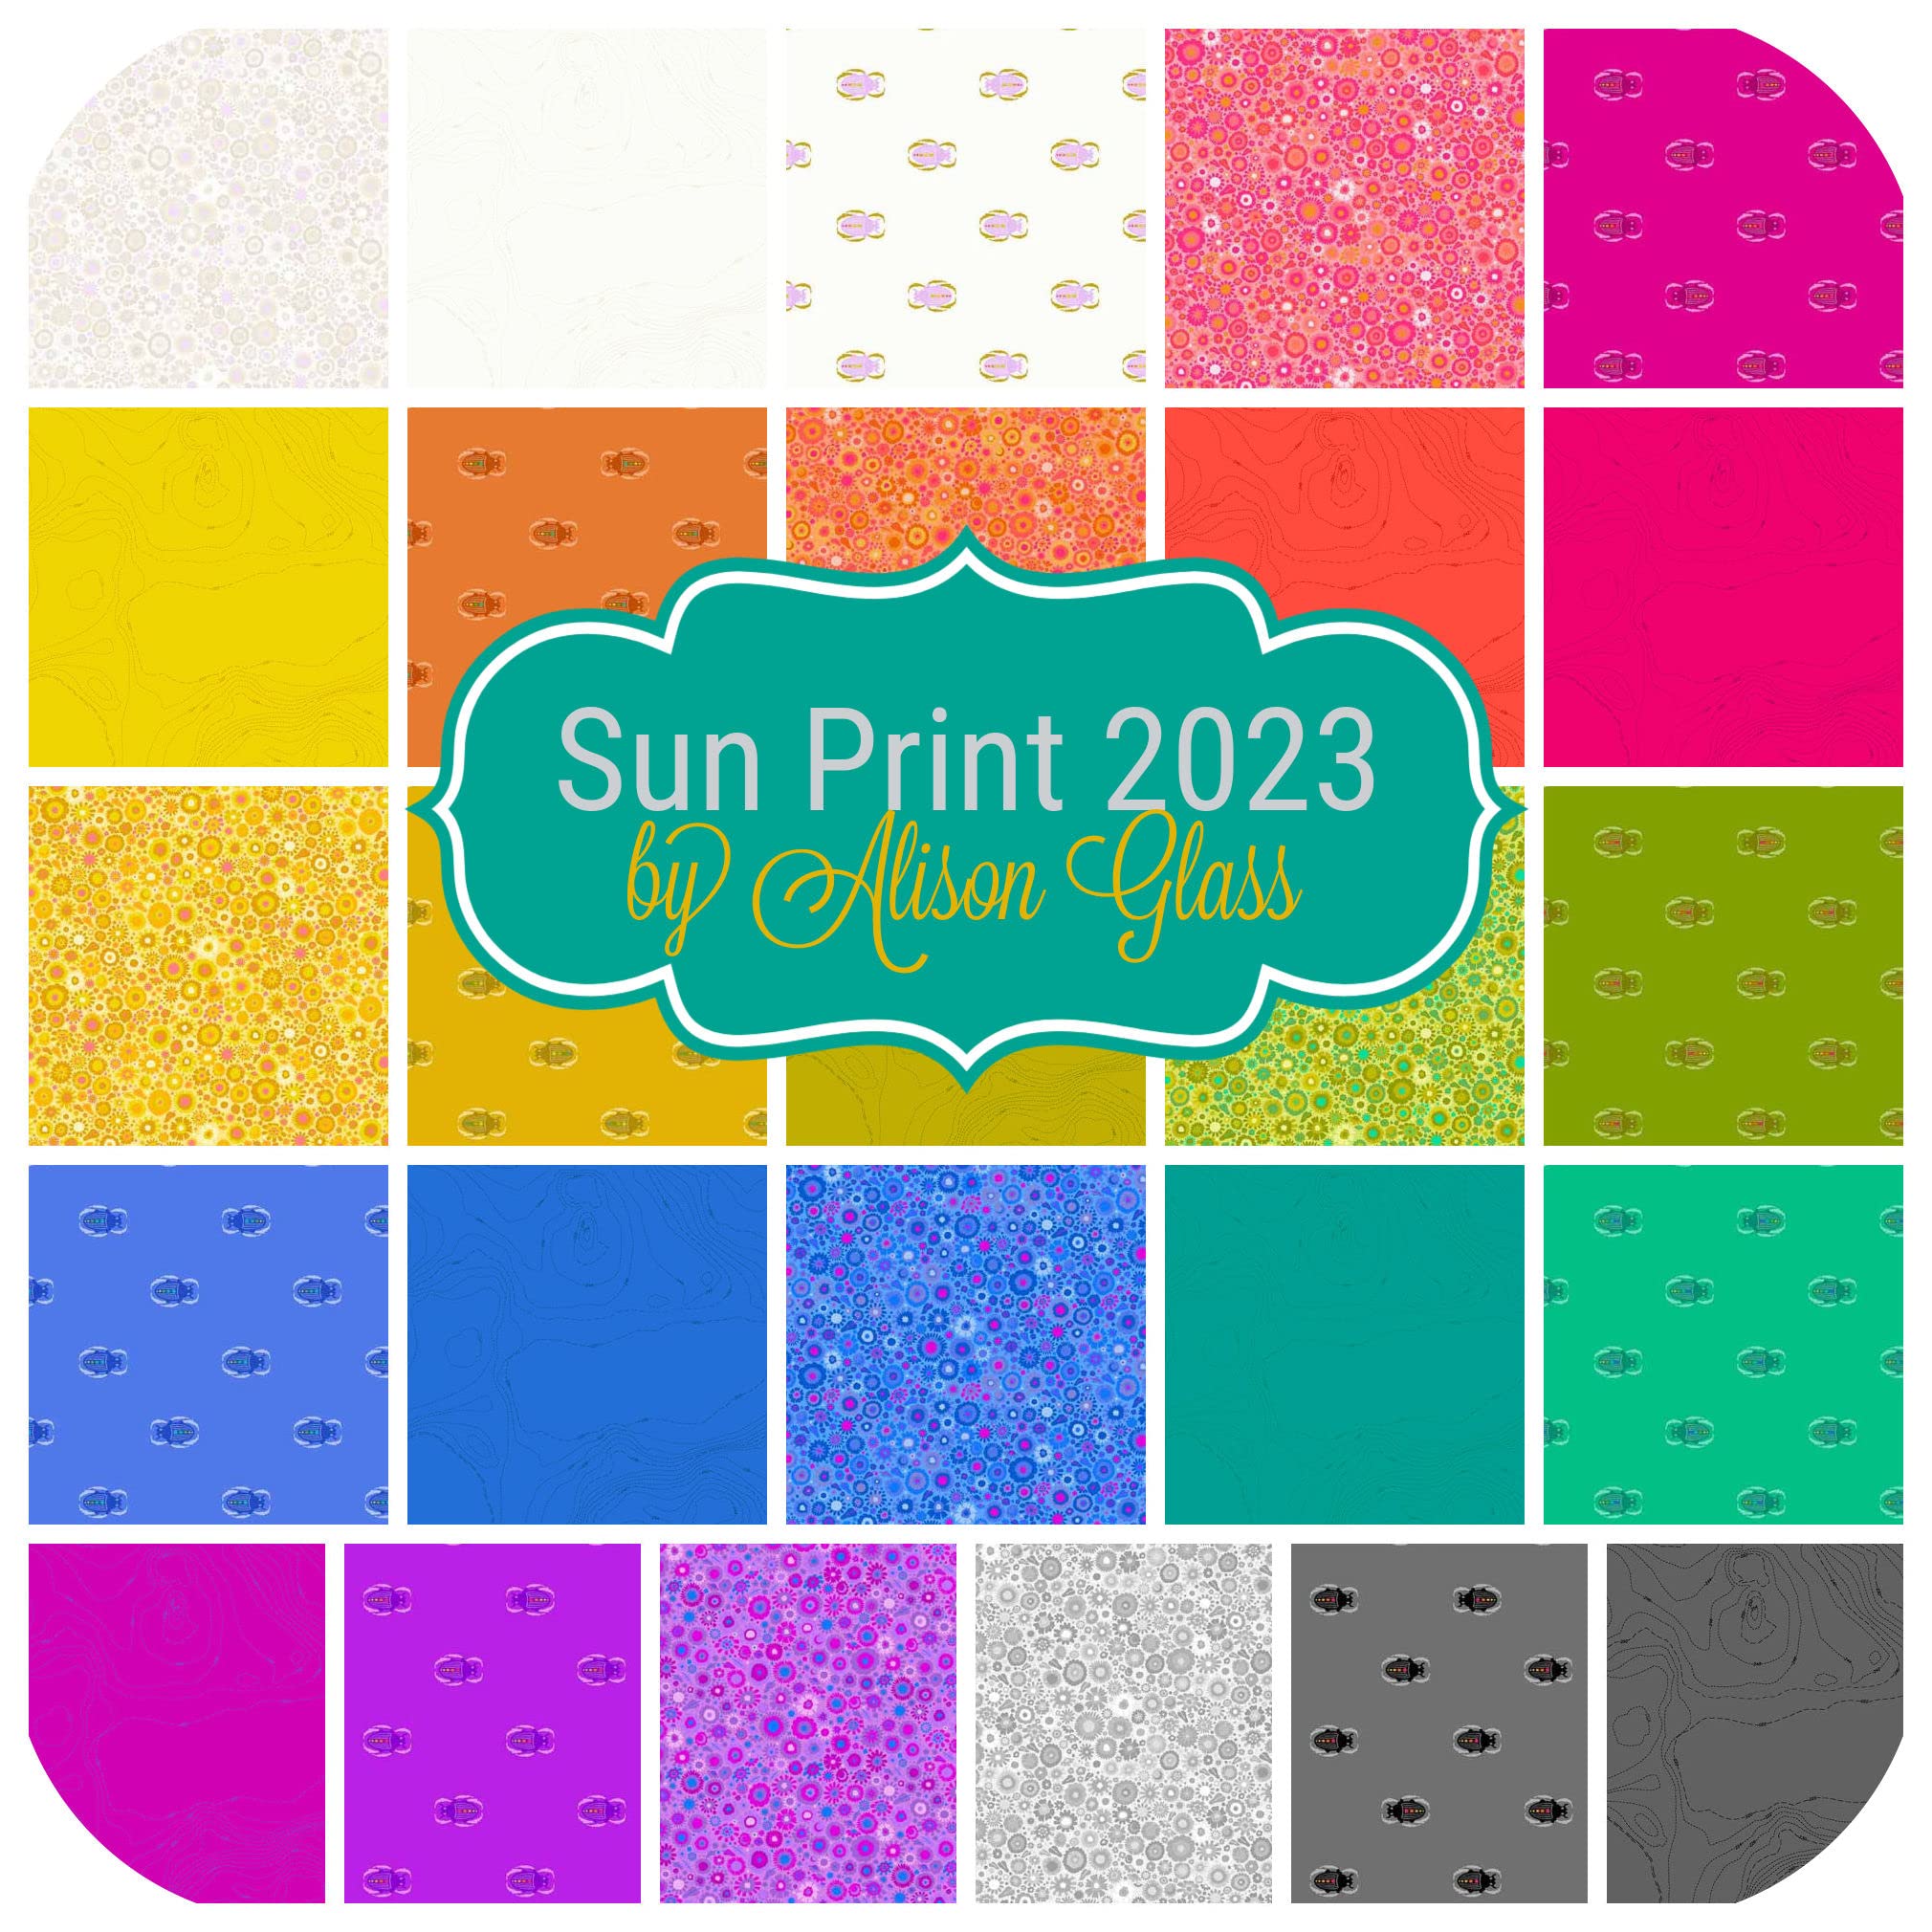 Sun Print 2023 Jelly Roll (40 Pieces) by Alison Glass for Andover 2.5 x 44 inches (6.35 cm x 111.76 cm) Fabric Strips DIY Quilt Fabric